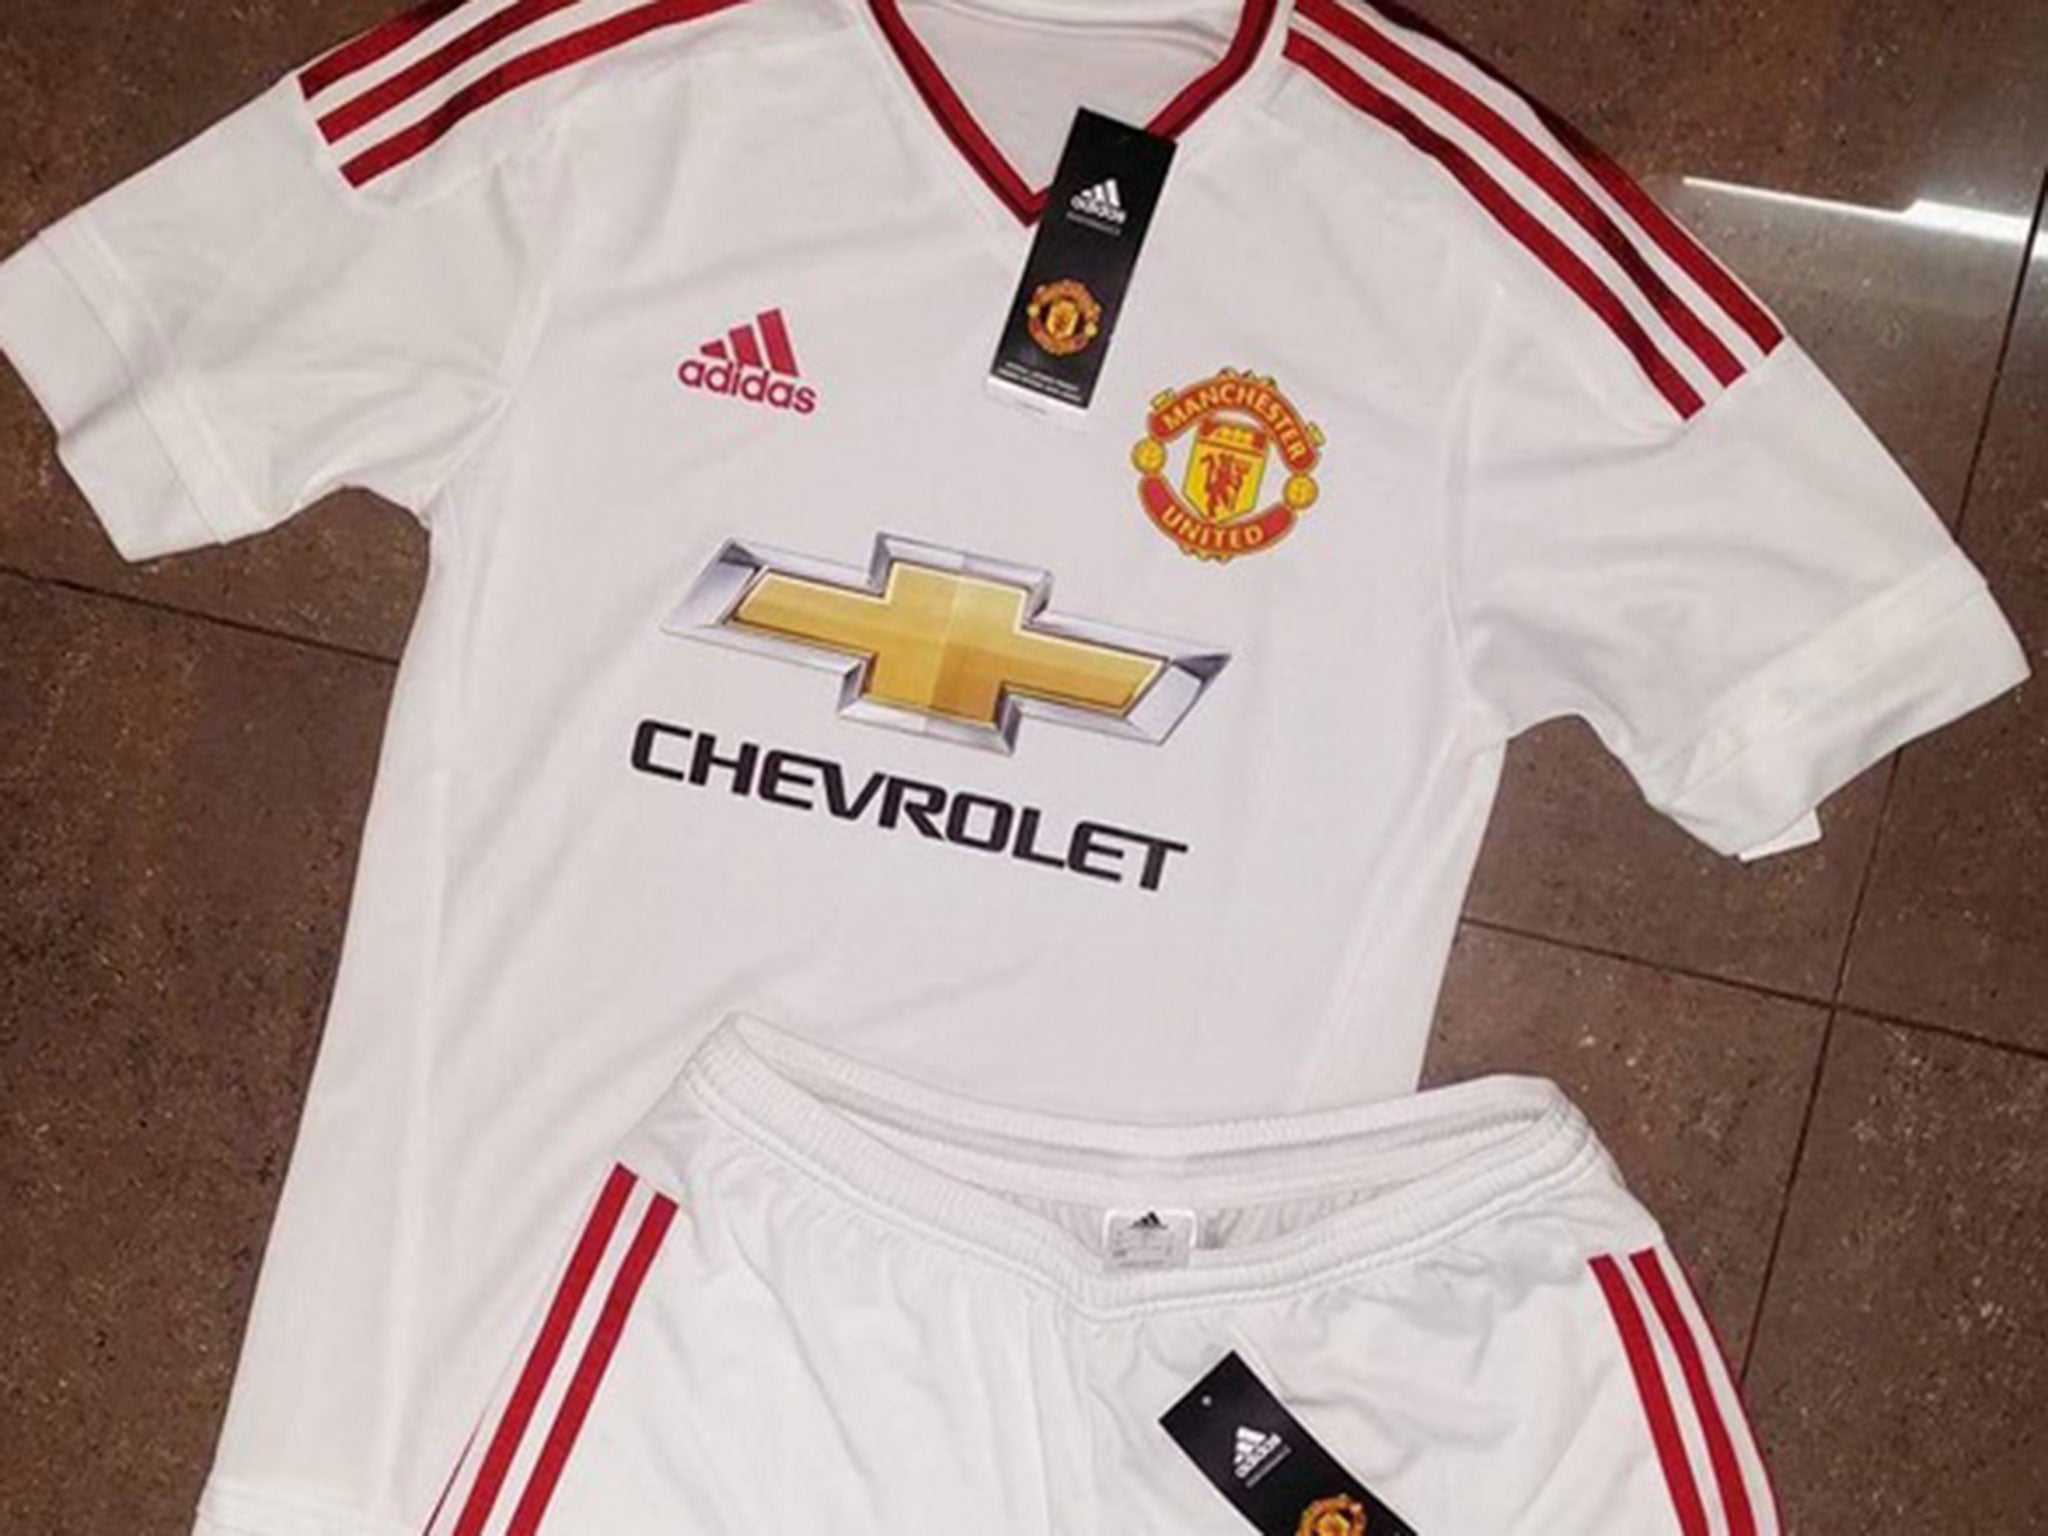 A leaked image of Manchester United's new away shirt